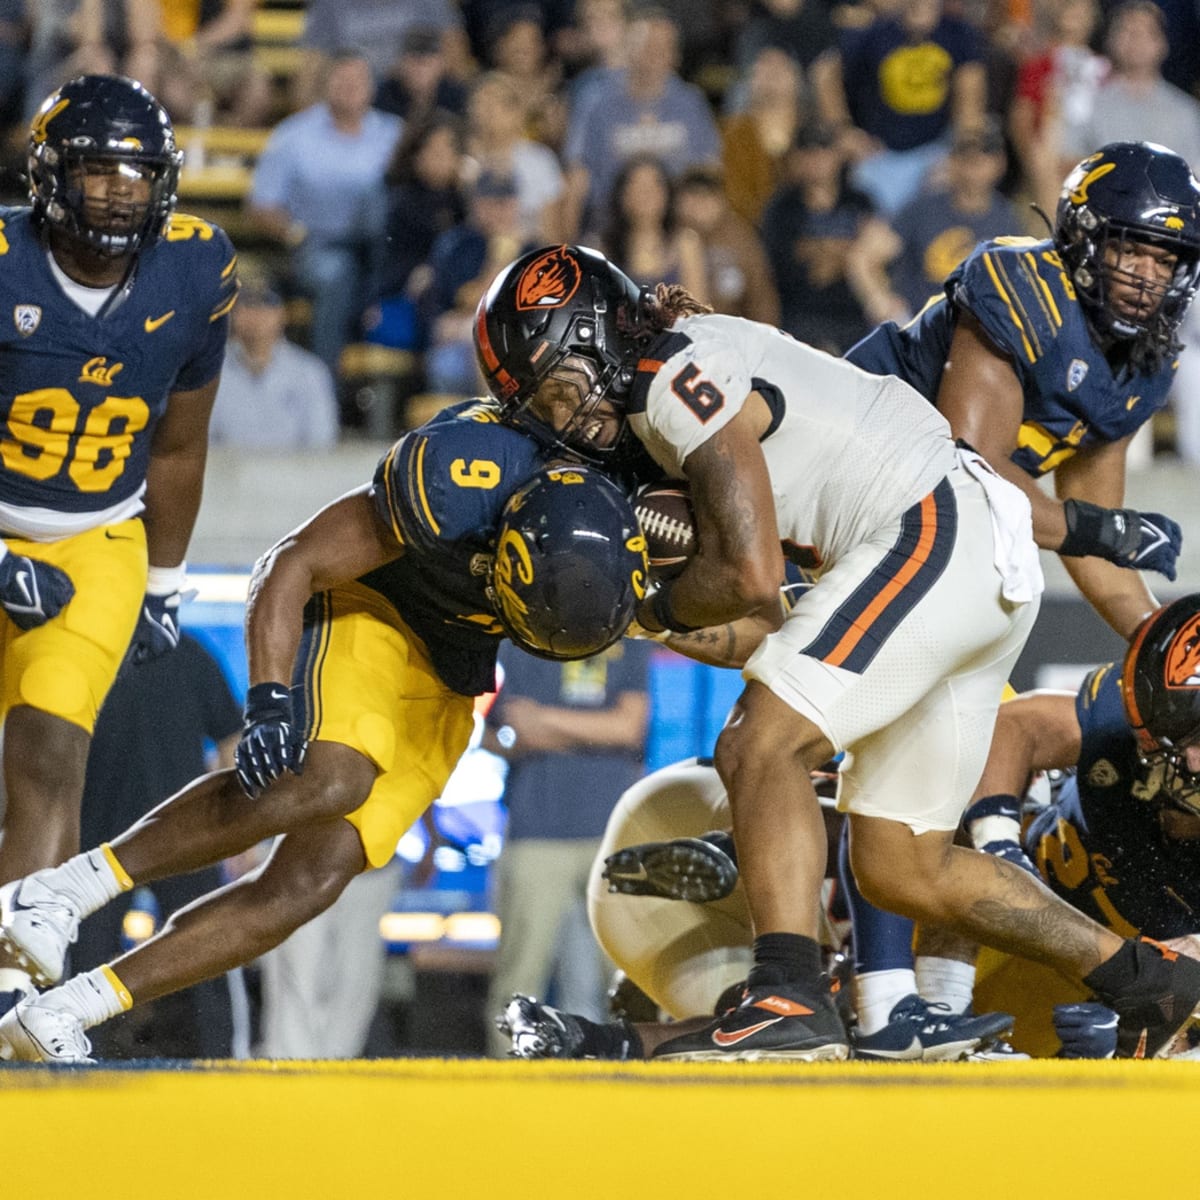 Cal Scheduled to Play Oregon State in Football in 2024 and 2025